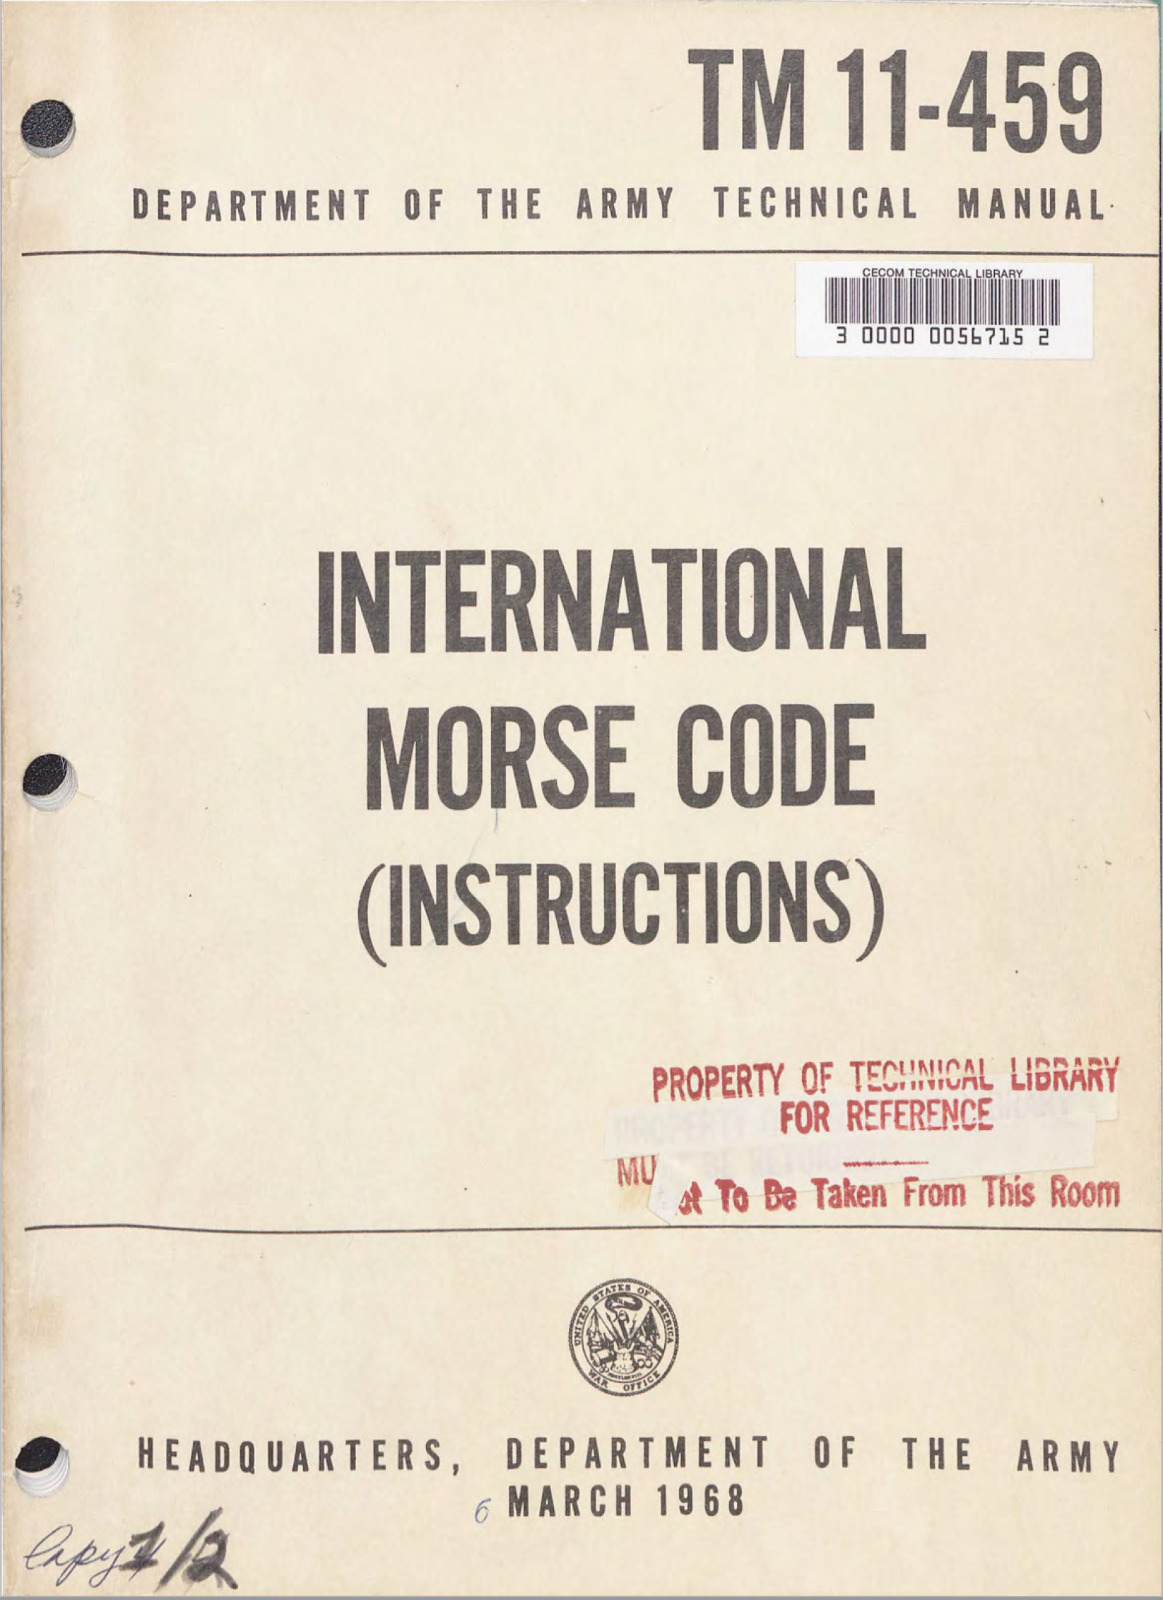 157 Page 1968 TM 11-459 International Morse Code (Instructions) Manual on CD